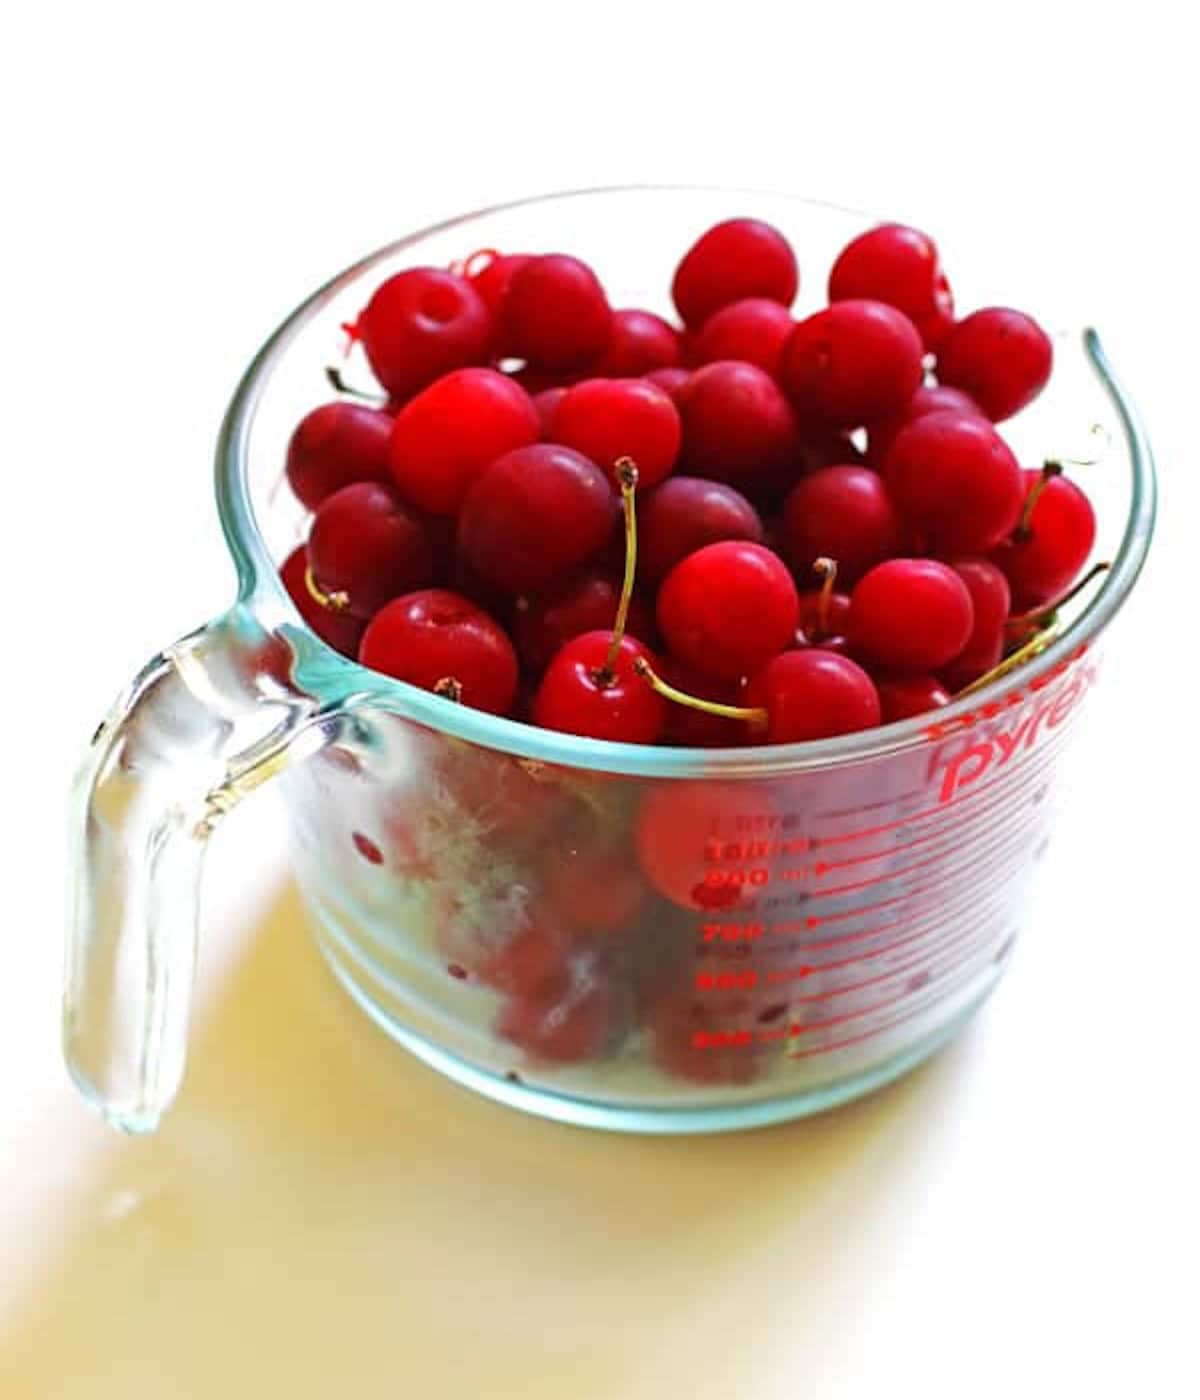 A pyrex cup of washed cherries.